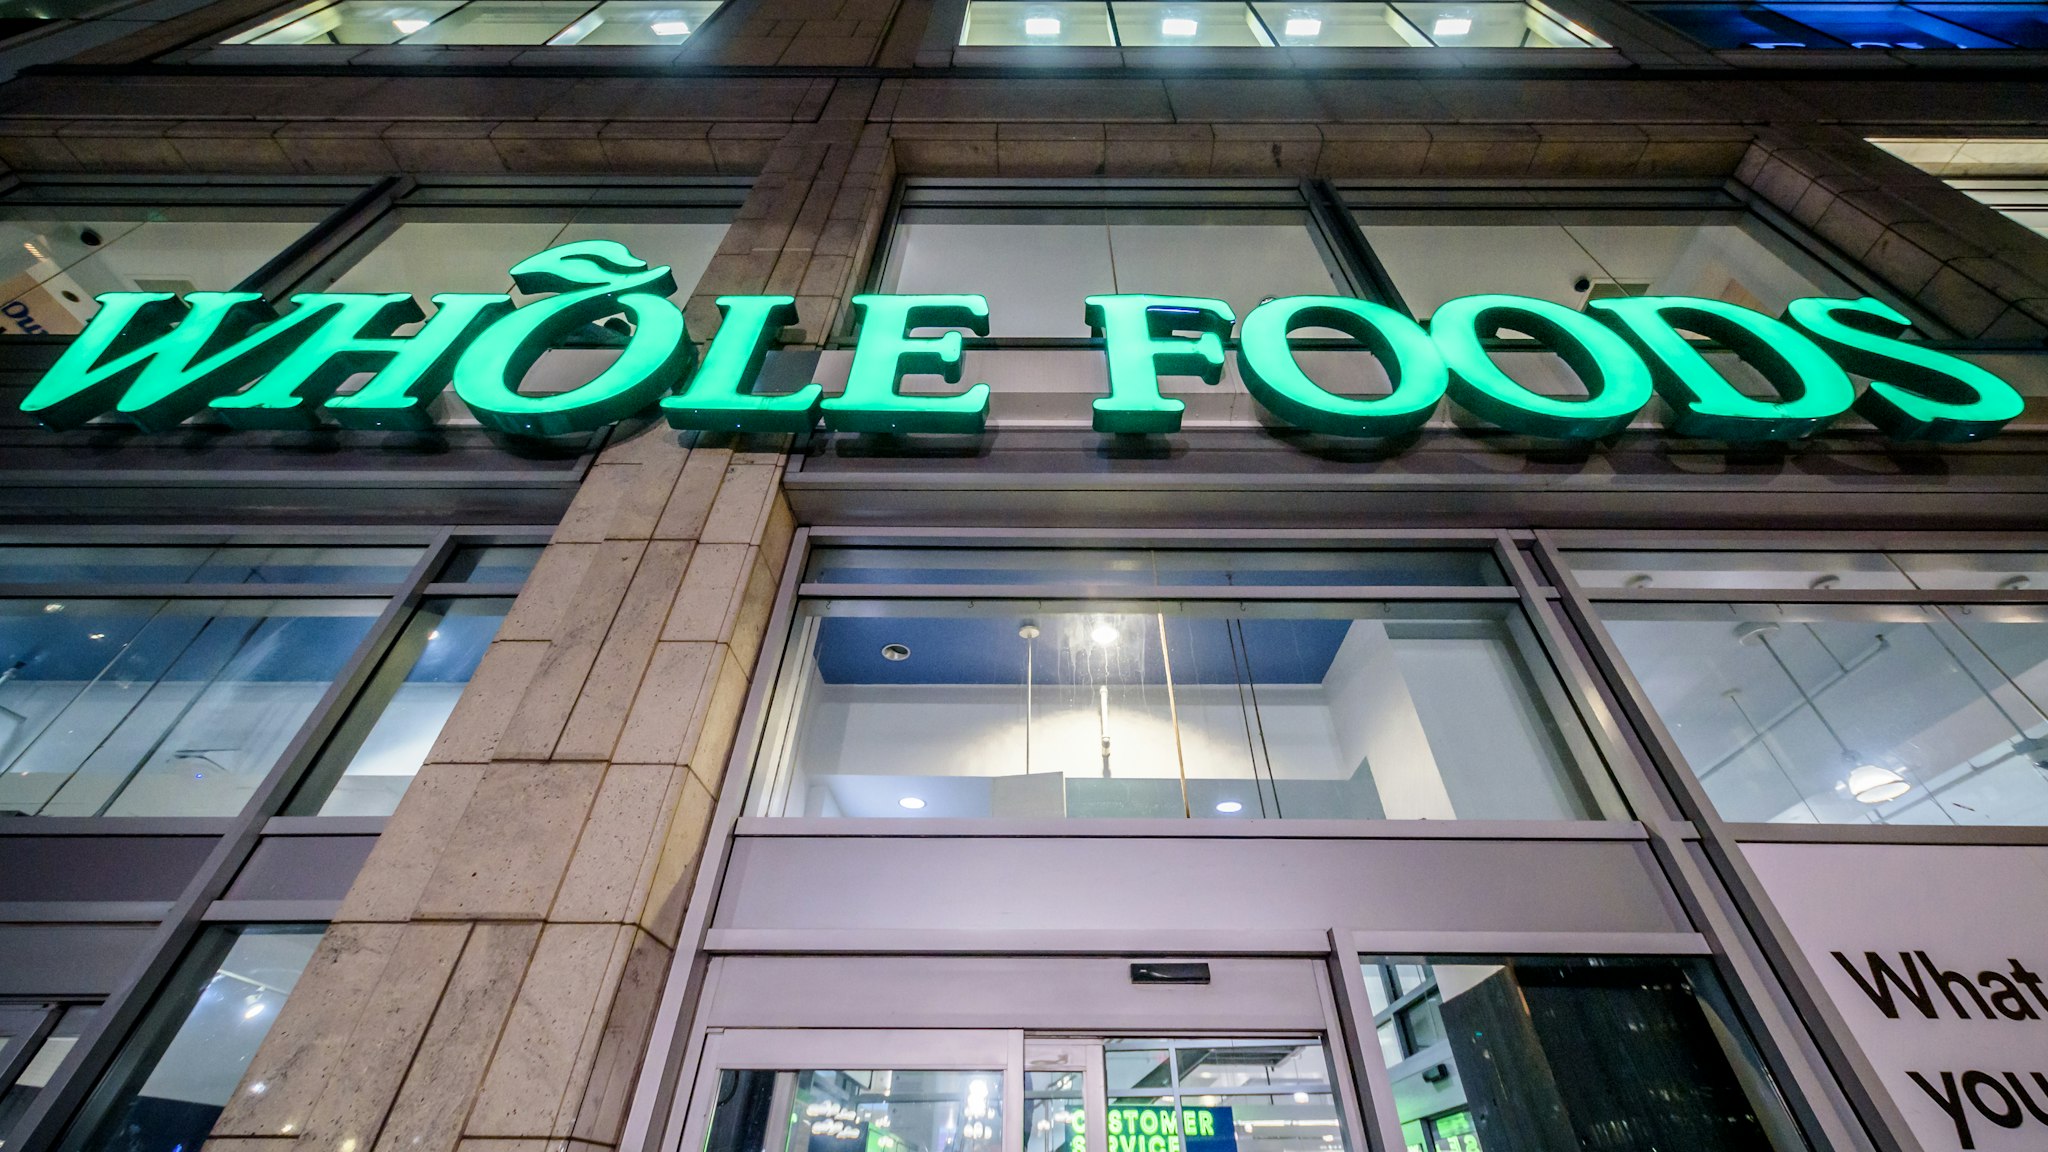 MANHATTAN, NEW YORK, UNITED STATES - 2019/11/08: Whole Foods Market store front at Union Square. (Photo by Erik McGregor/LightRocket via Getty Images)